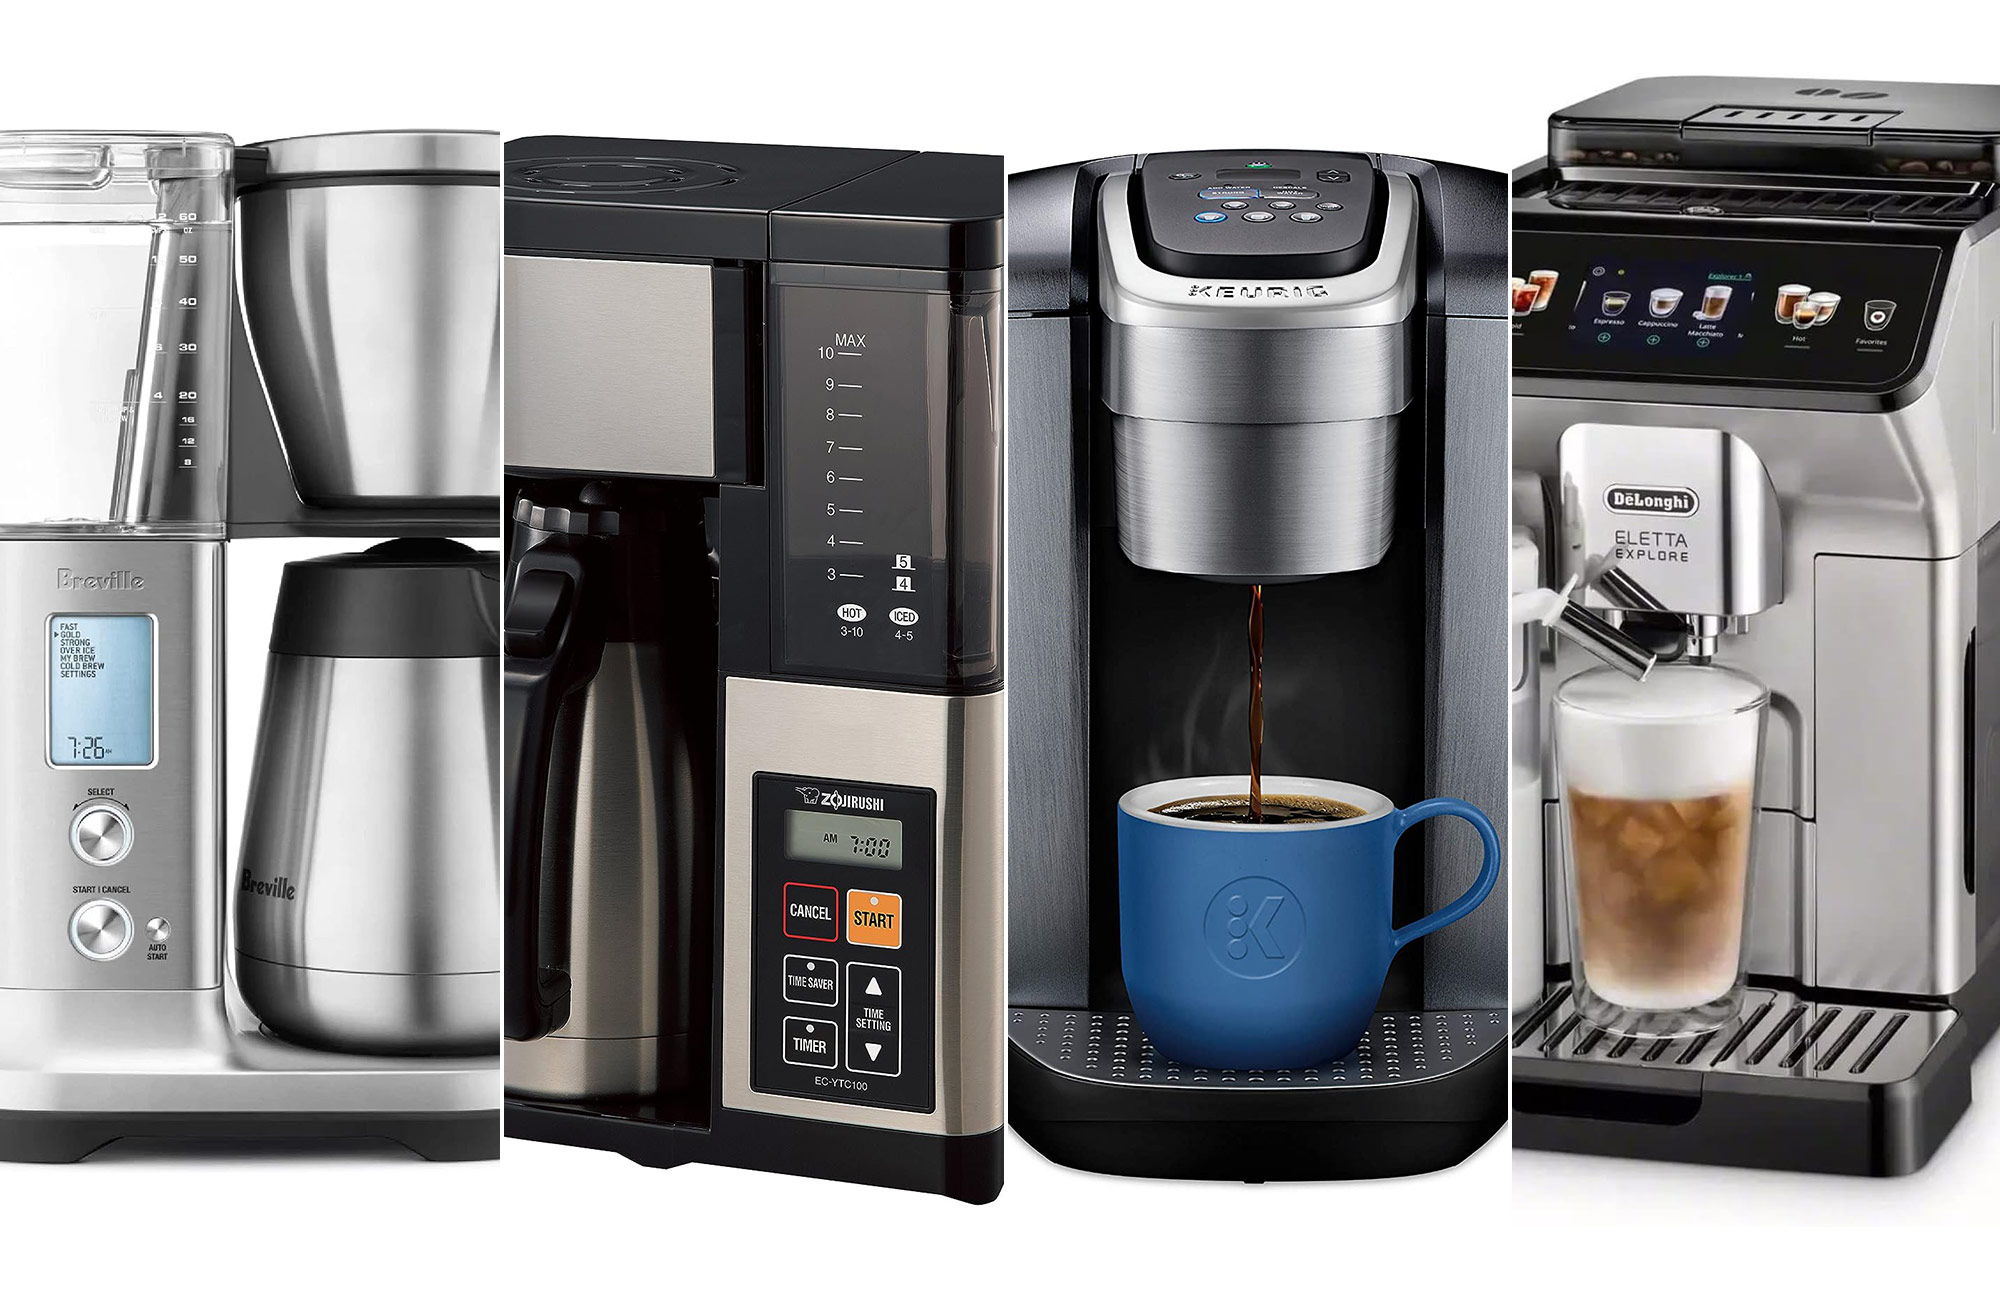 Best Dual Coffee Maker (Two-way Coffee Brewer Reviews)